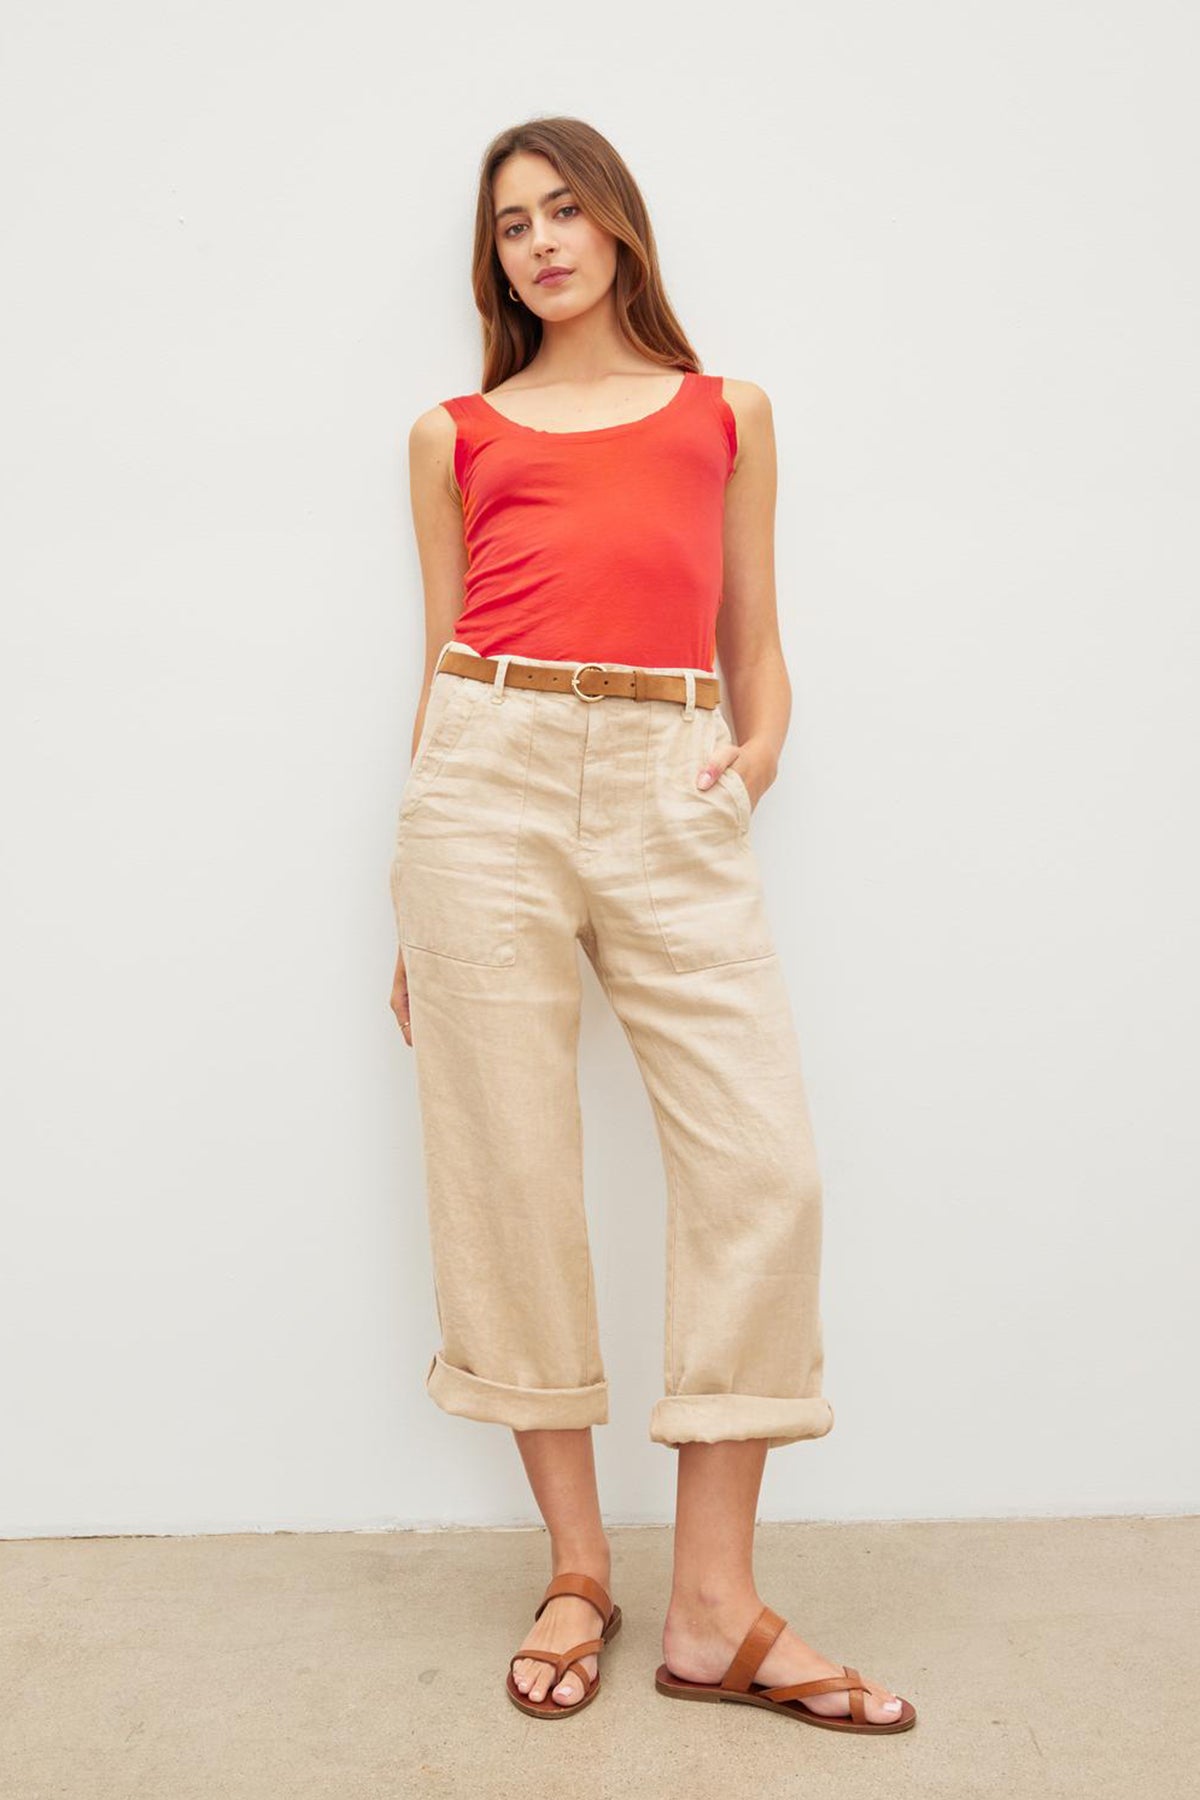   The model is wearing a red Velvet by Graham & Spencer MOSSY GAUZY WHISPER FITTED TANK and tan cropped pants. 